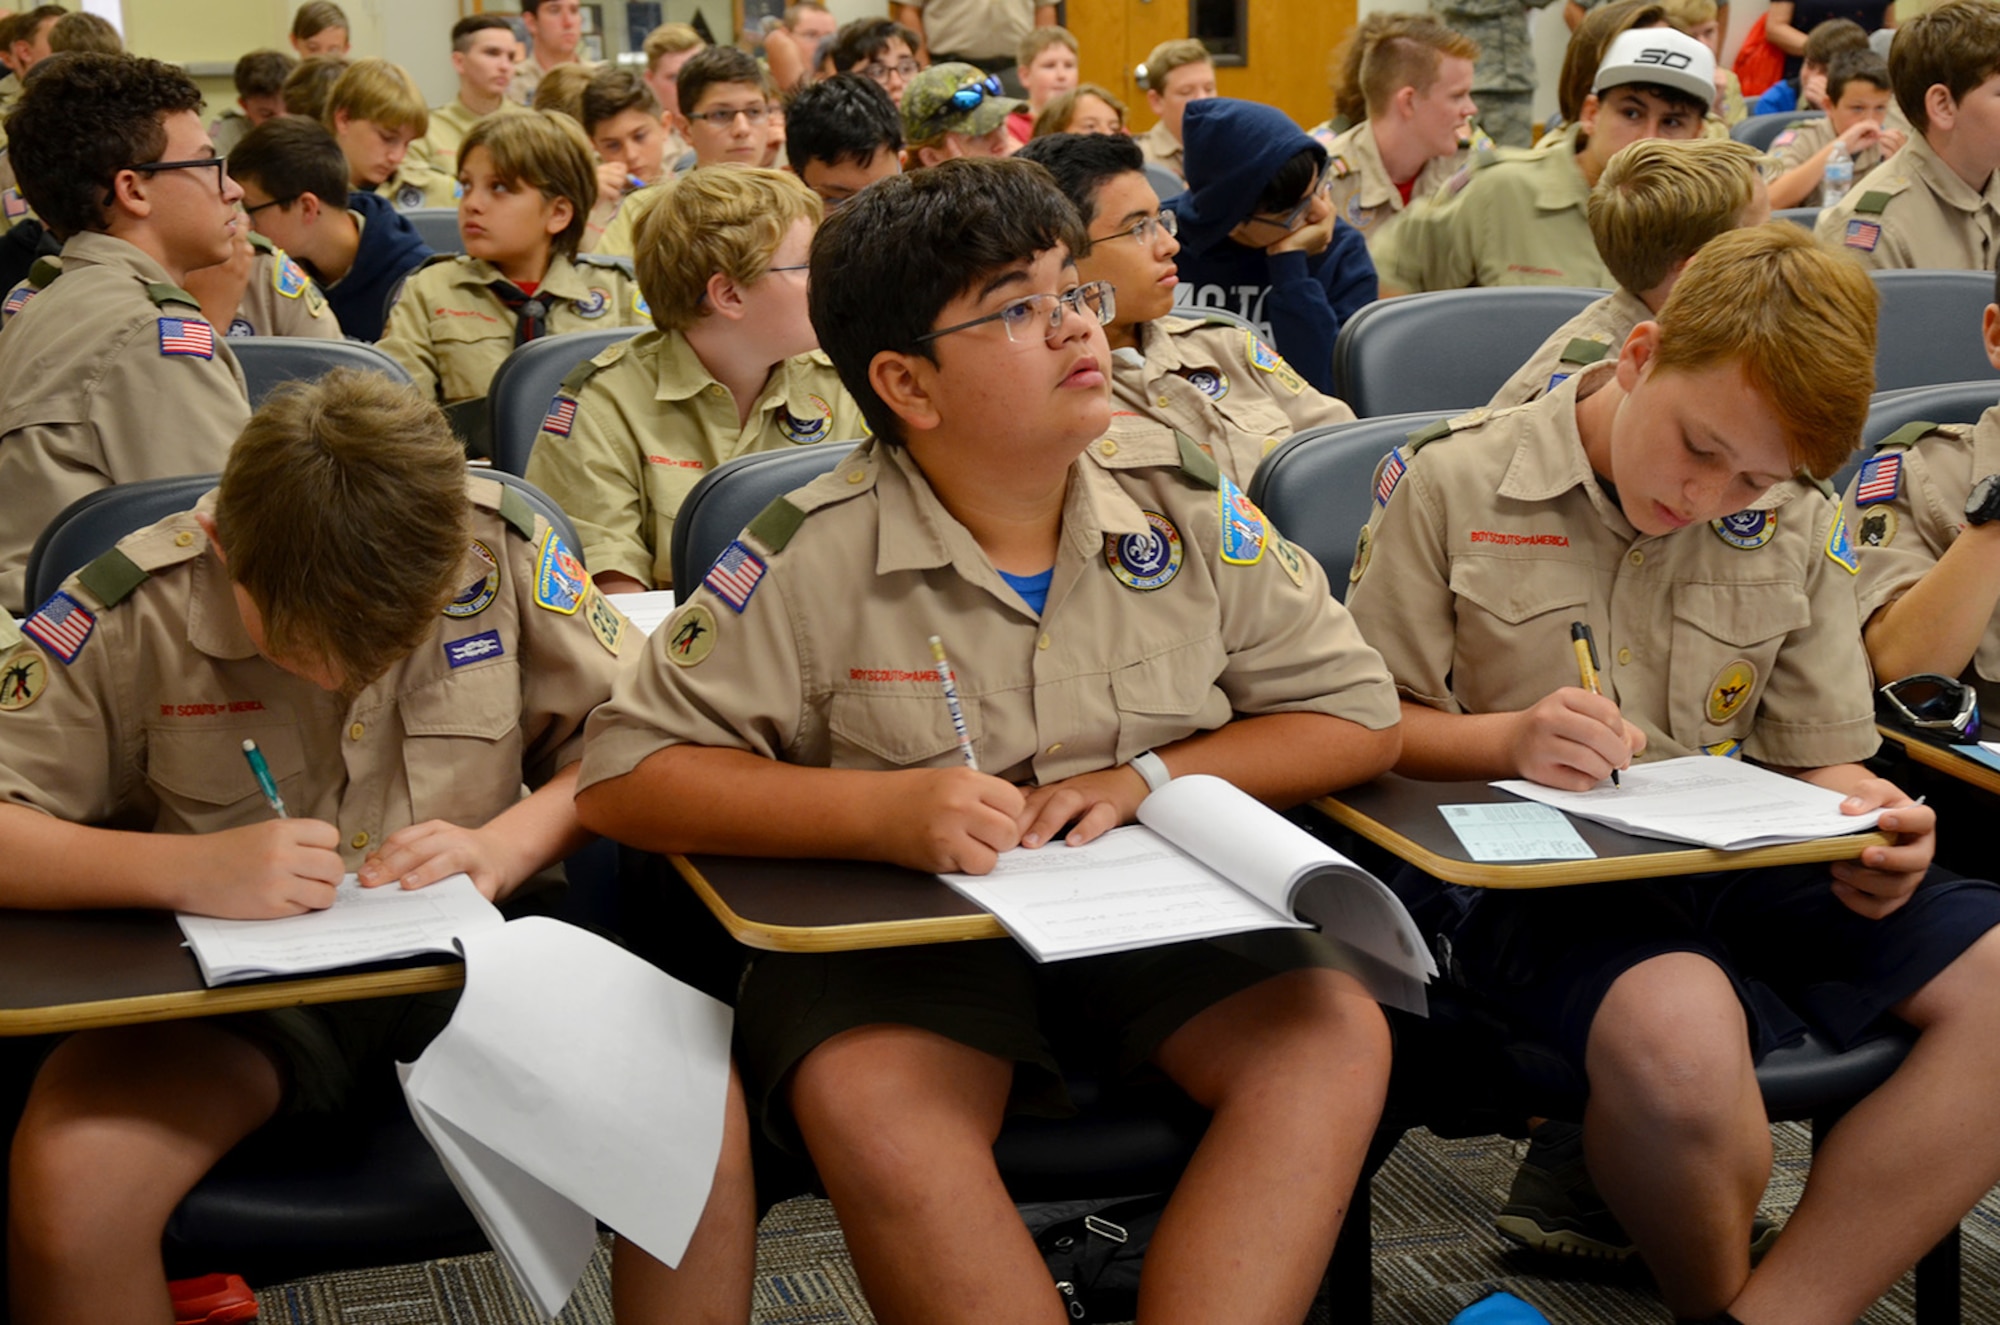 Jake Shipley (center), a 13-year-old Boy Scout from Hoover Middle School in Melbourne Beach, Fla., glances at PowerPoint slides as fellow scouts Ryan Herbruger (left) and Grand Newcombe (right) take notes during the Nuclear Science Merit Badge event hosted by the Air Force Technical Applications Center, Patrick AFB, Fla., March 31, 2018.  Shipley and his fellow scouts from Troop #330 earned the badge with the help of volunteers from the nuclear treaty monitoring center.  (U.S. Air Force photo by Susan A. Romano)